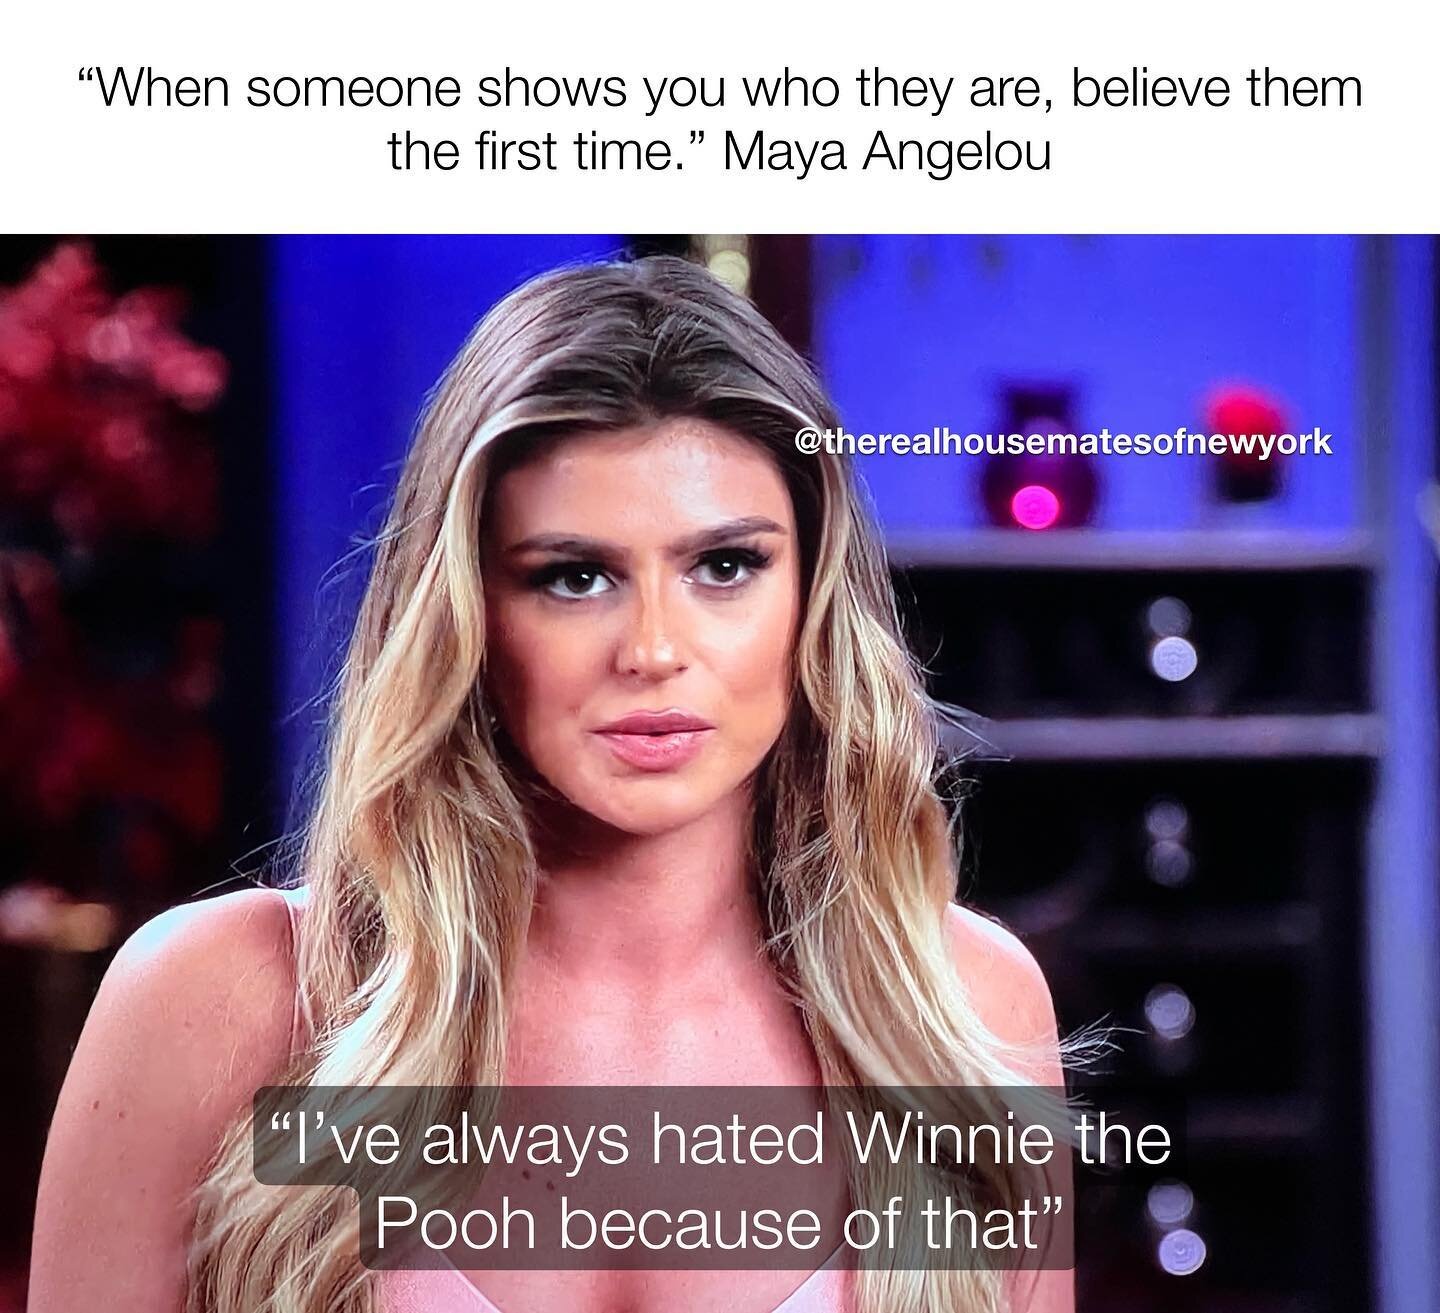 We should&rsquo;ve known. Only a demon could hate Winnie The Pooh. 

#pumprules #vanderpumprules #scandoval #bravotv #teamariana #winniethepooh #evilincarnate #nottodaysatan #howcouldyou #nope #bravoholic #sundayscaries #mayaangelou #podcasters #real